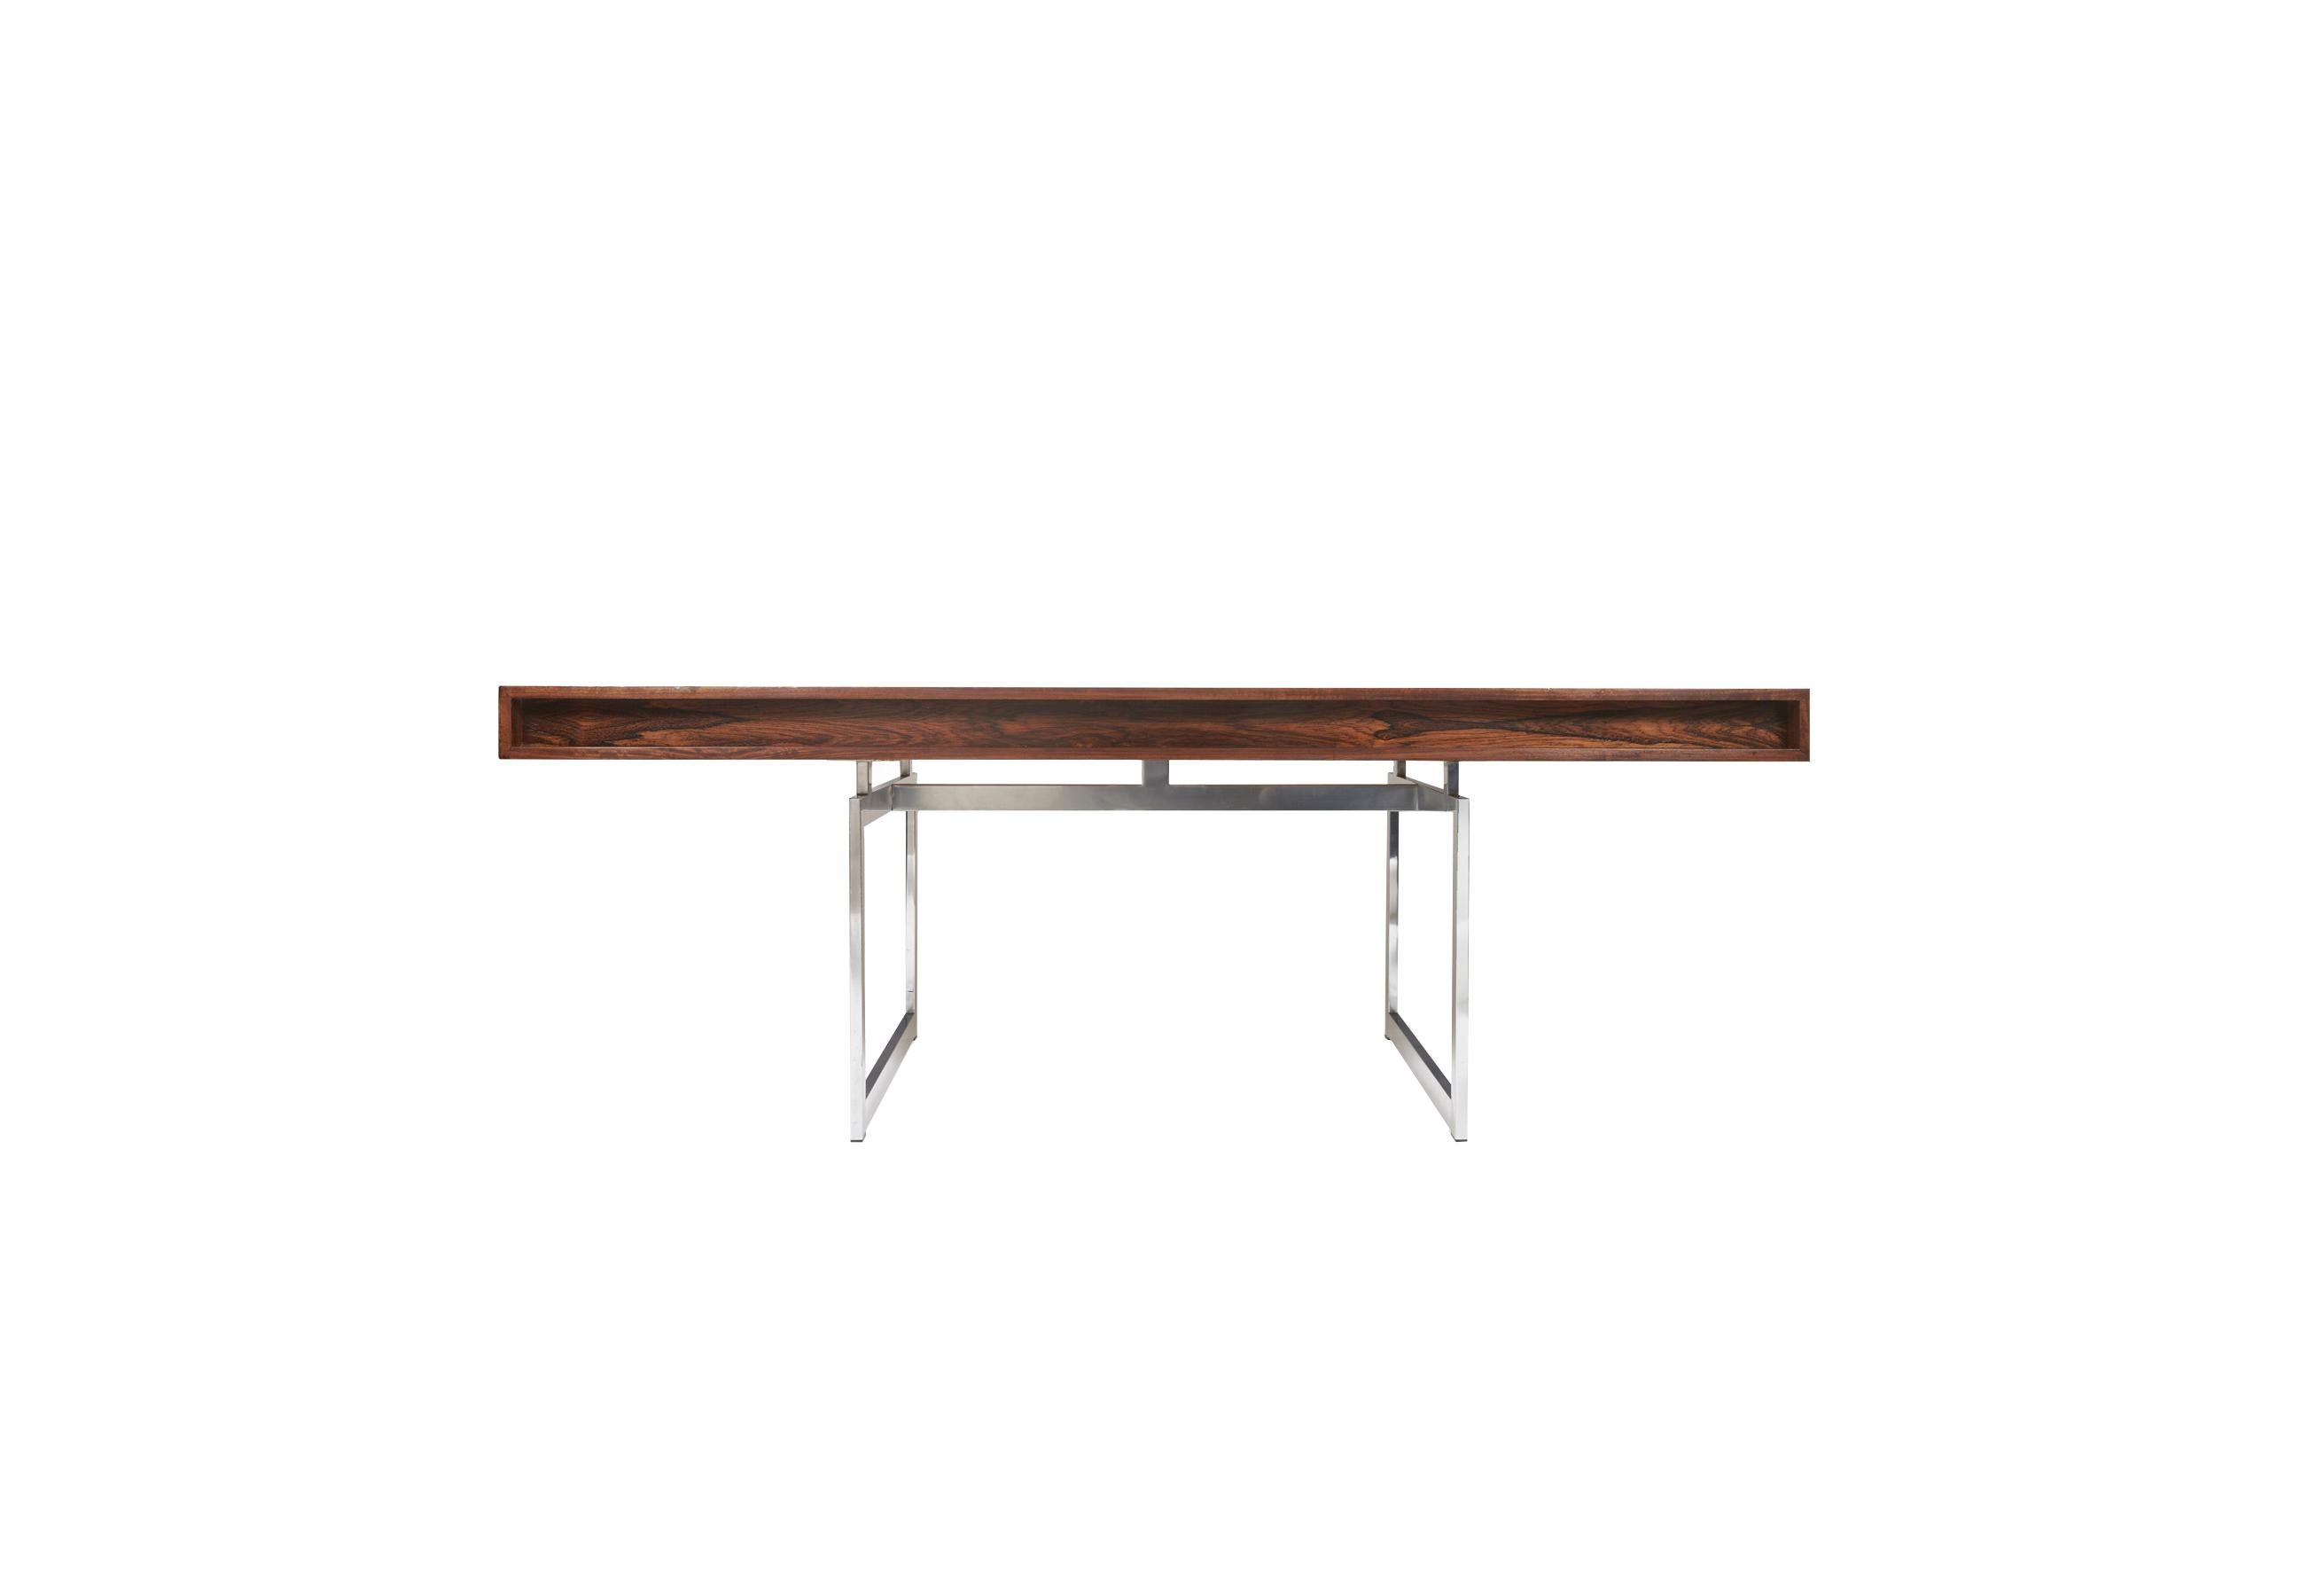 Bodil Kjaer large freestanding rosewood executive desk, model 901 with chrome-plated metal frame, cassette top with four recessed drawers. Produced by E. Pedersen & Søn, Denmark. Manufacturer’s label to the underside. Key included.
The rosewood is